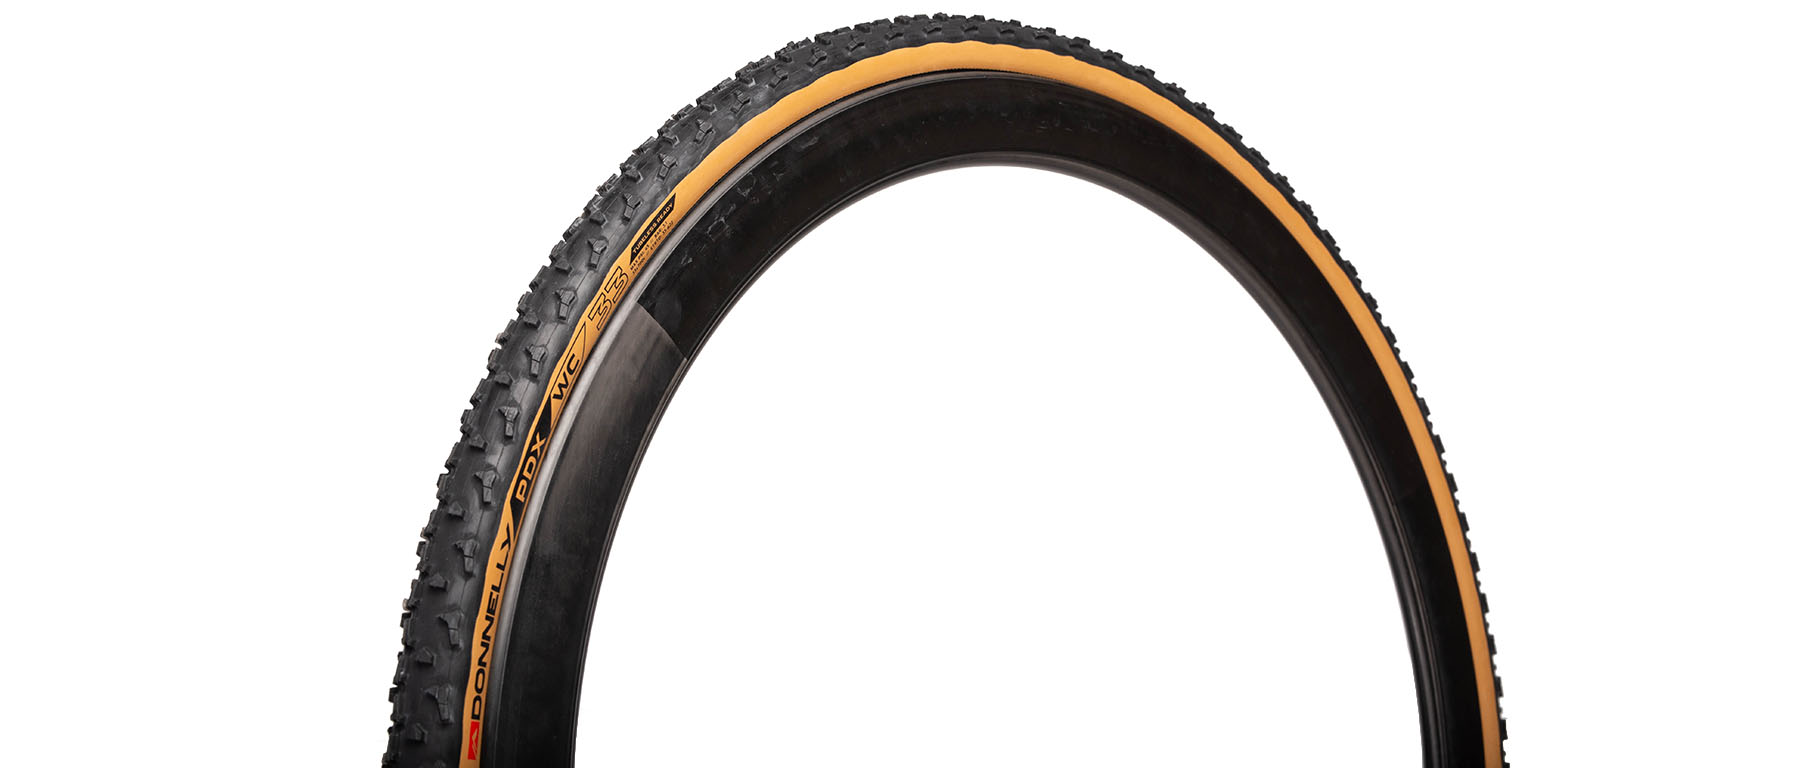 Tubeless 700 x 33 Folding 240tpi Donnelly Sports PDX WC Tire Black/Tan